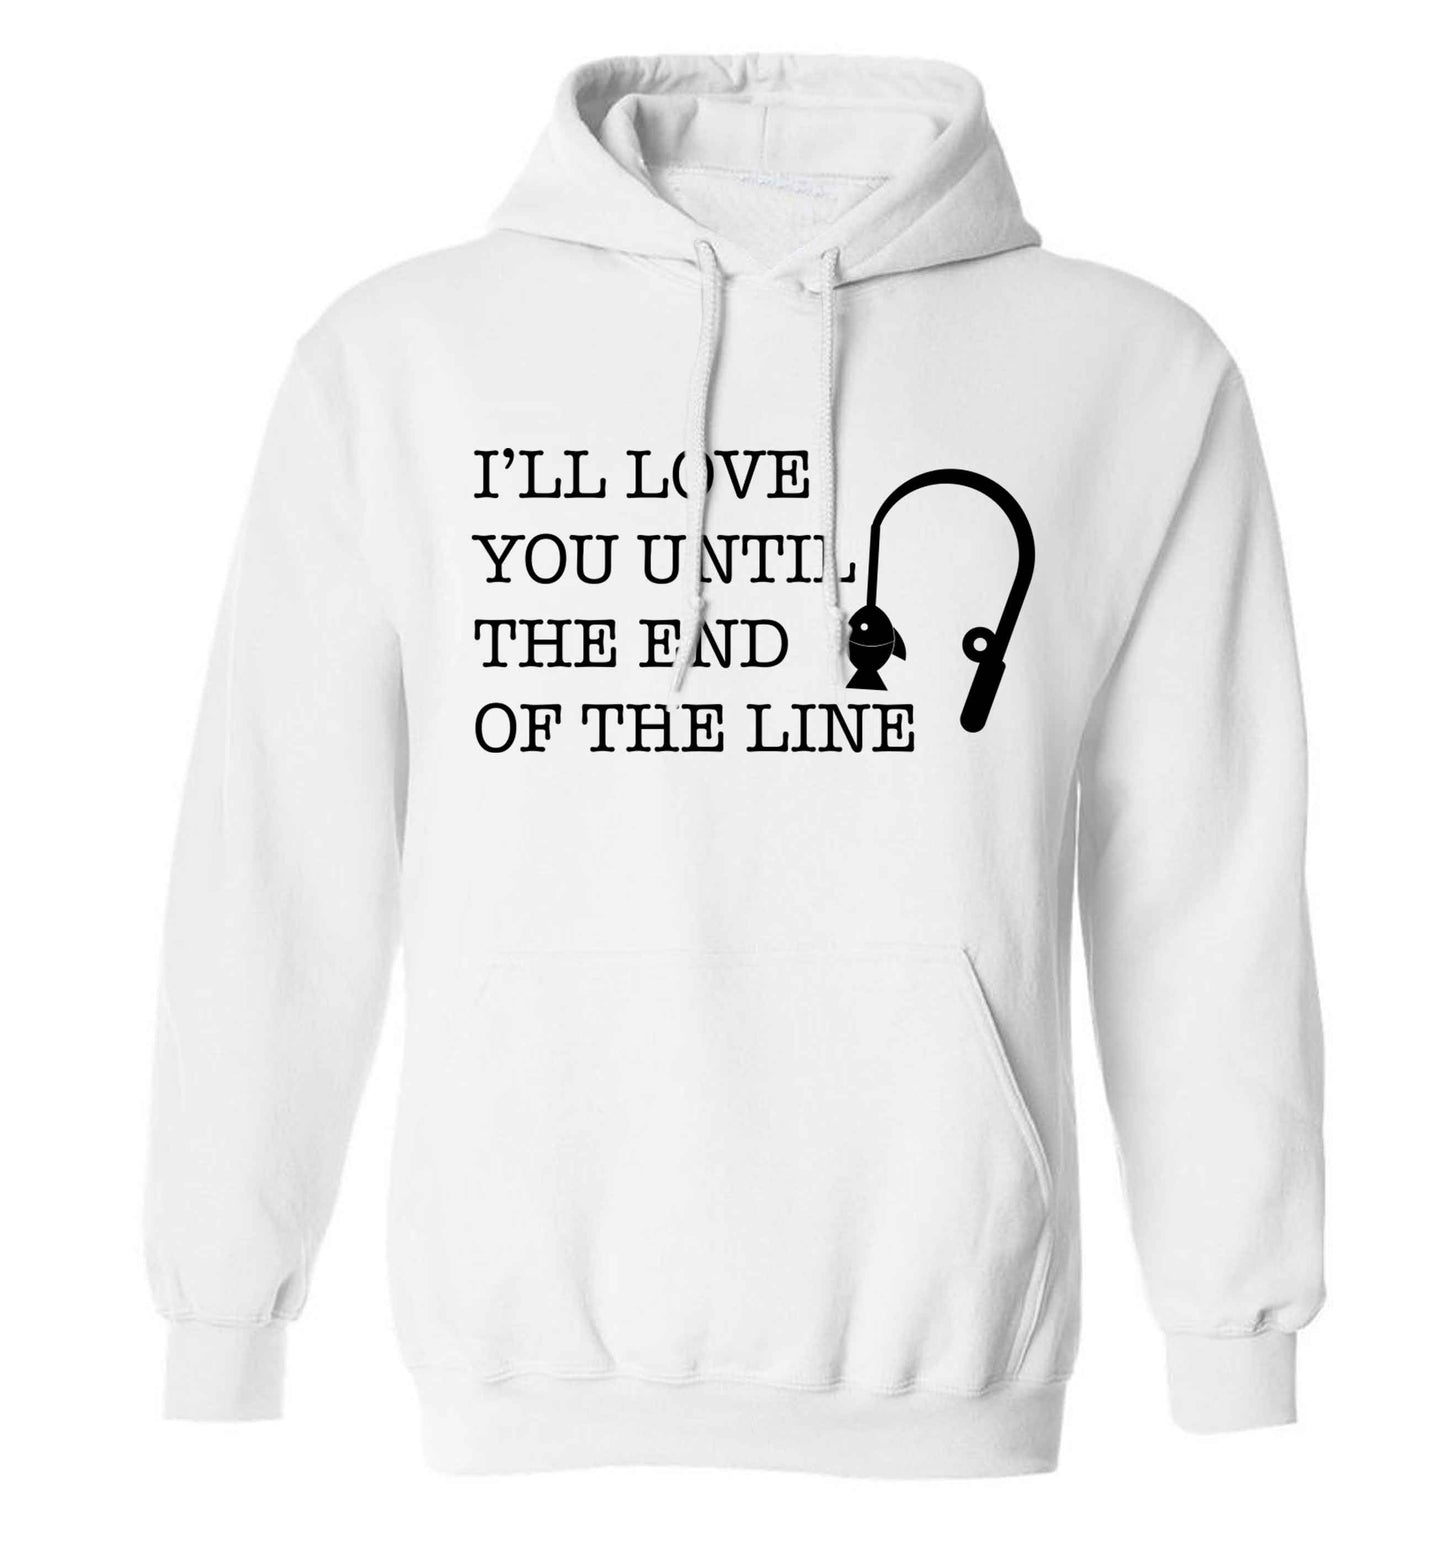 I'll love you until the end of the line adults unisex white hoodie 2XL